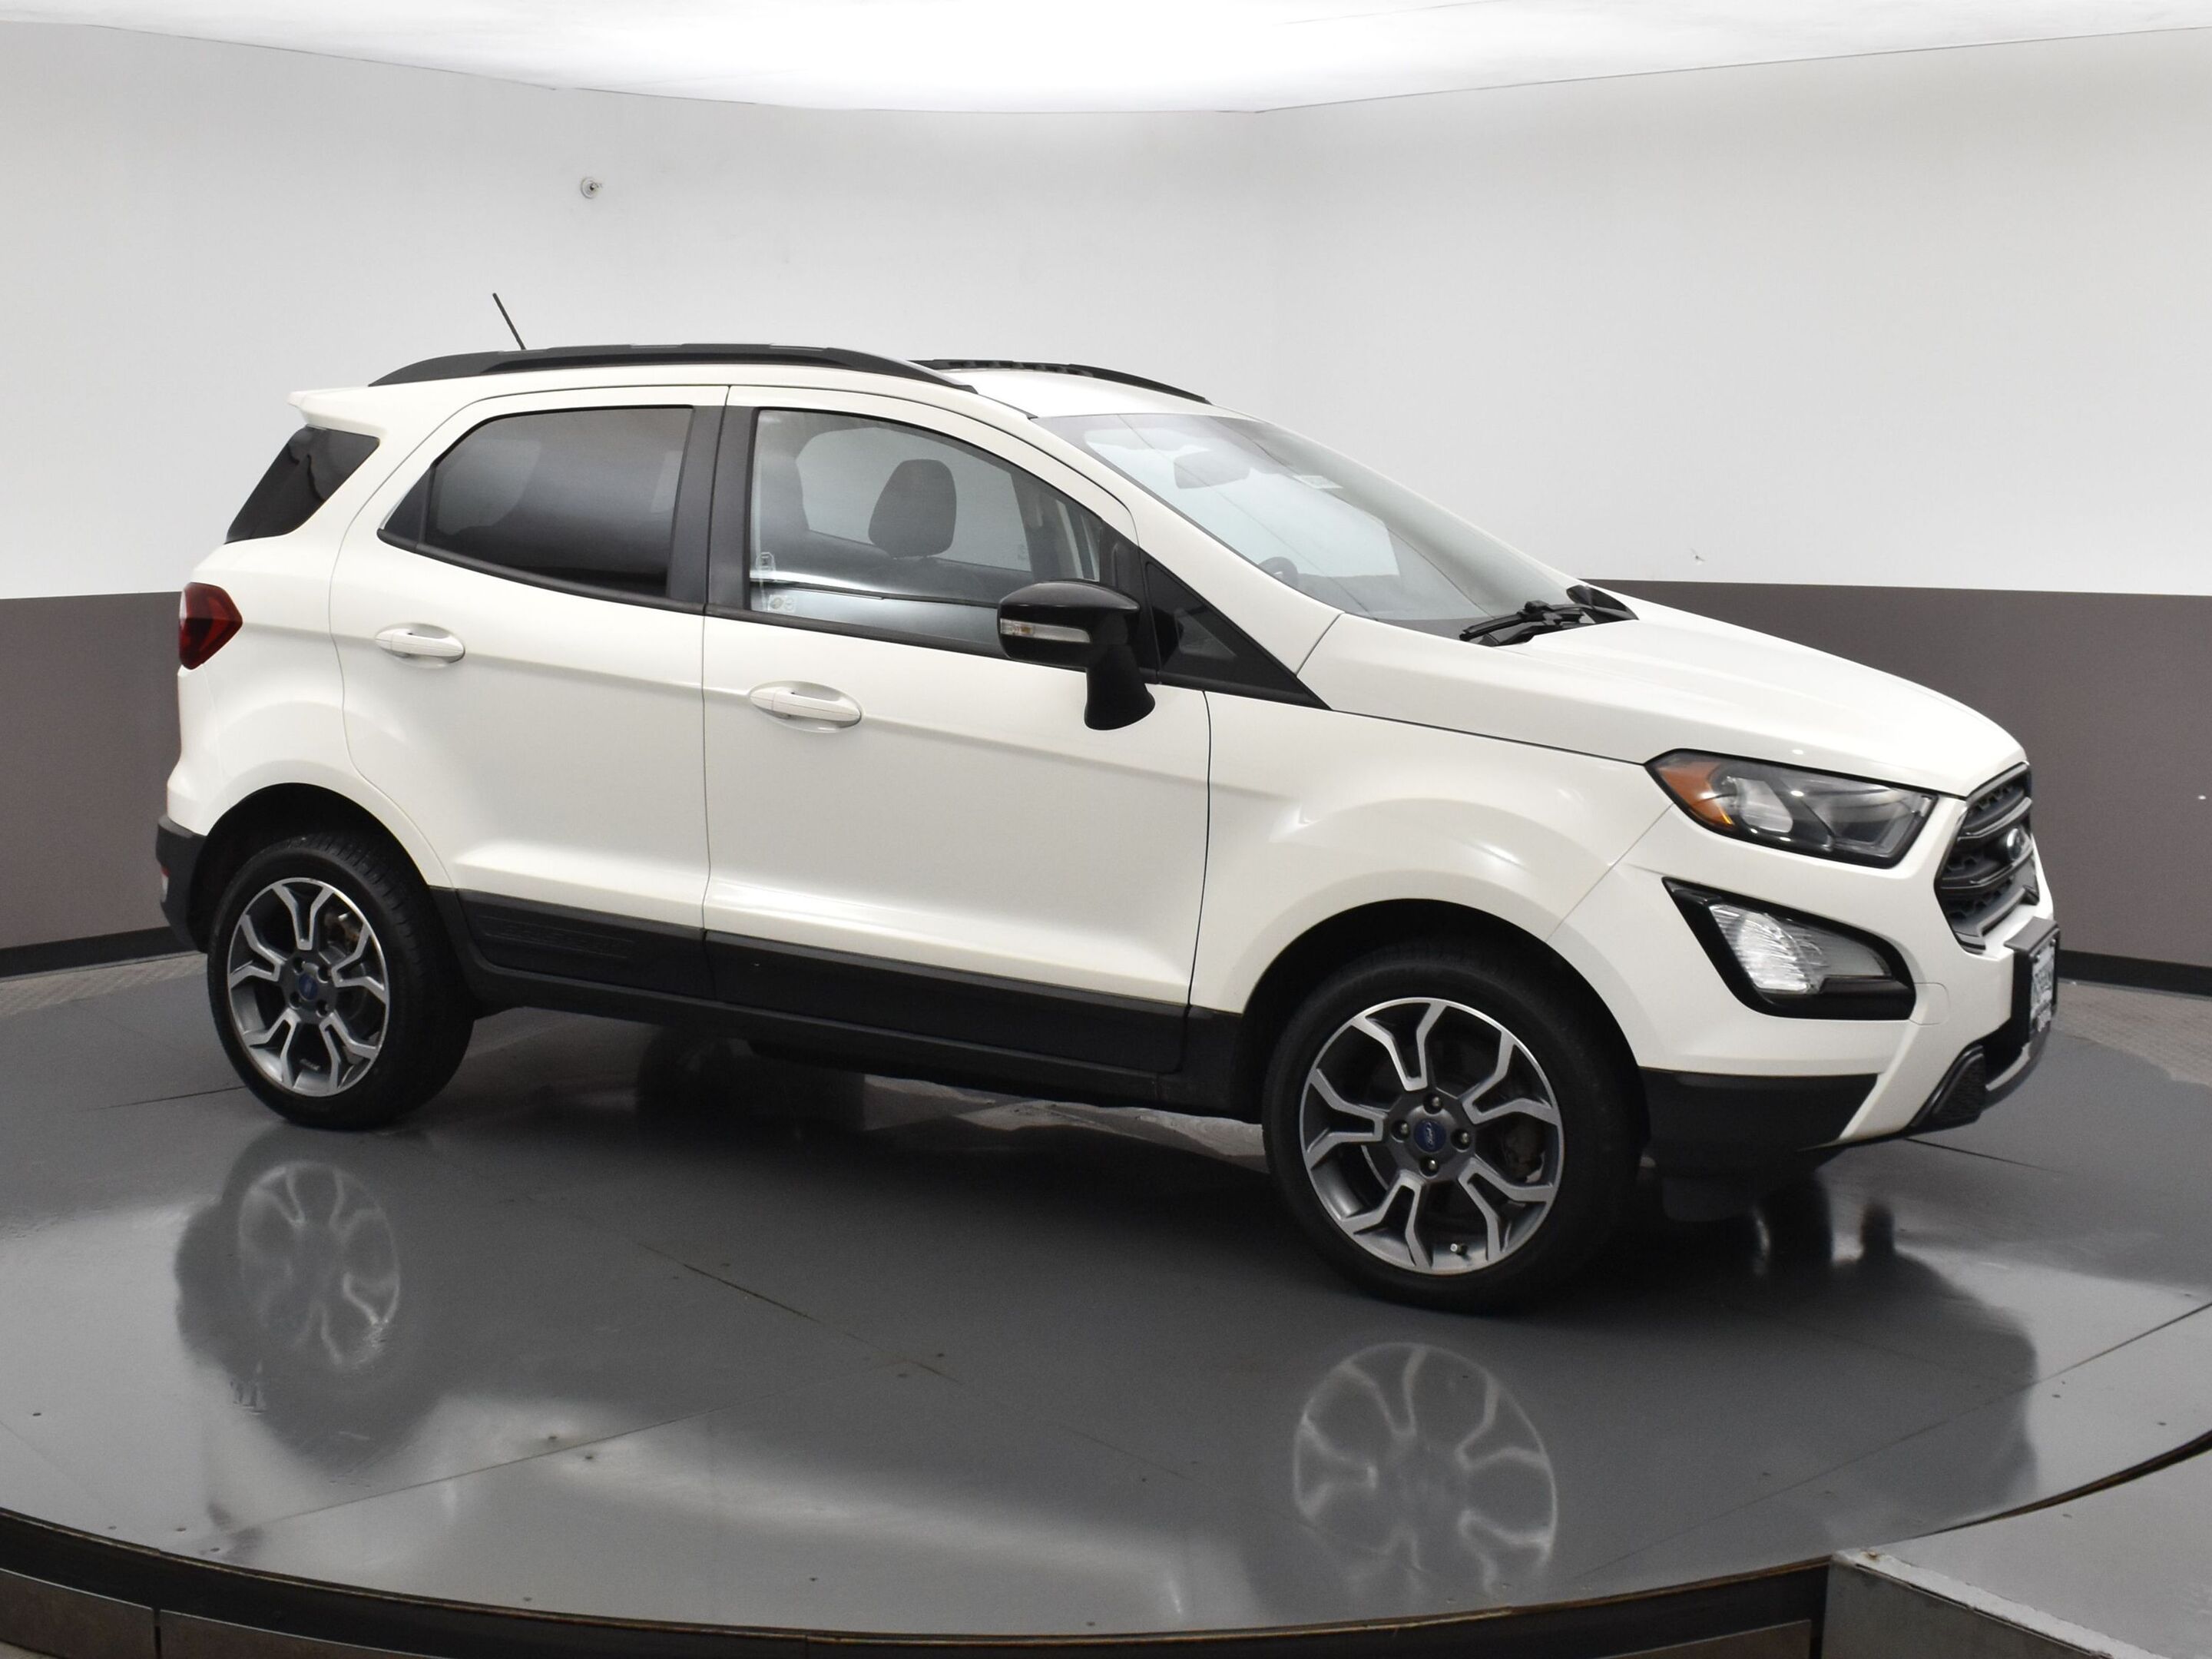 2019 Ford EcoSport SES SUV 4WD w/ Leather trim seats, Heated seats an